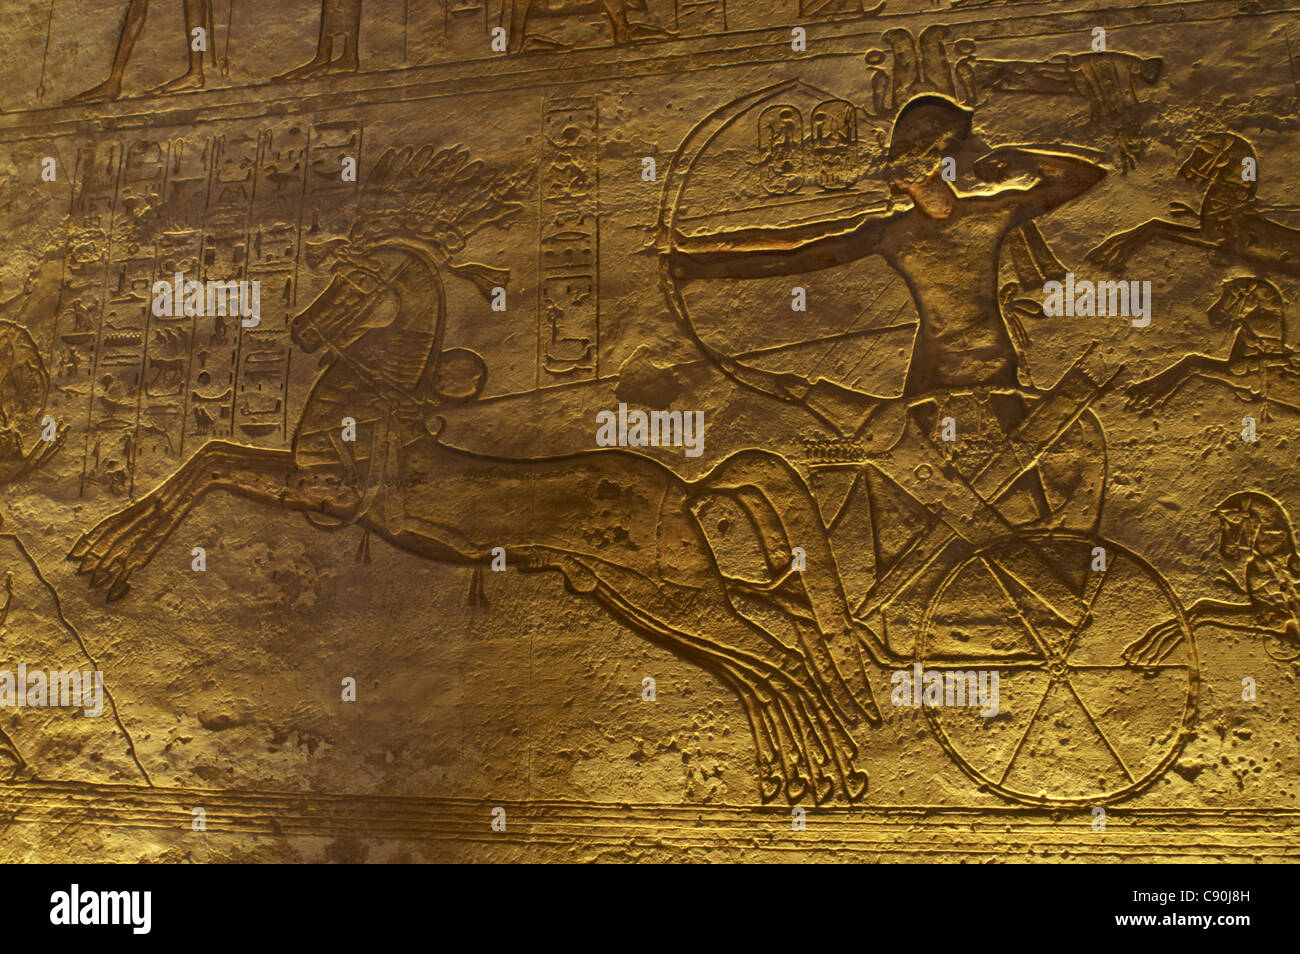 Egyptian art. Great Temple of Ramses II. Ramses II in a chariot with a bow and arrow at the Battle of Kadesh. Abu Simbel. Egypt. Stock Photo